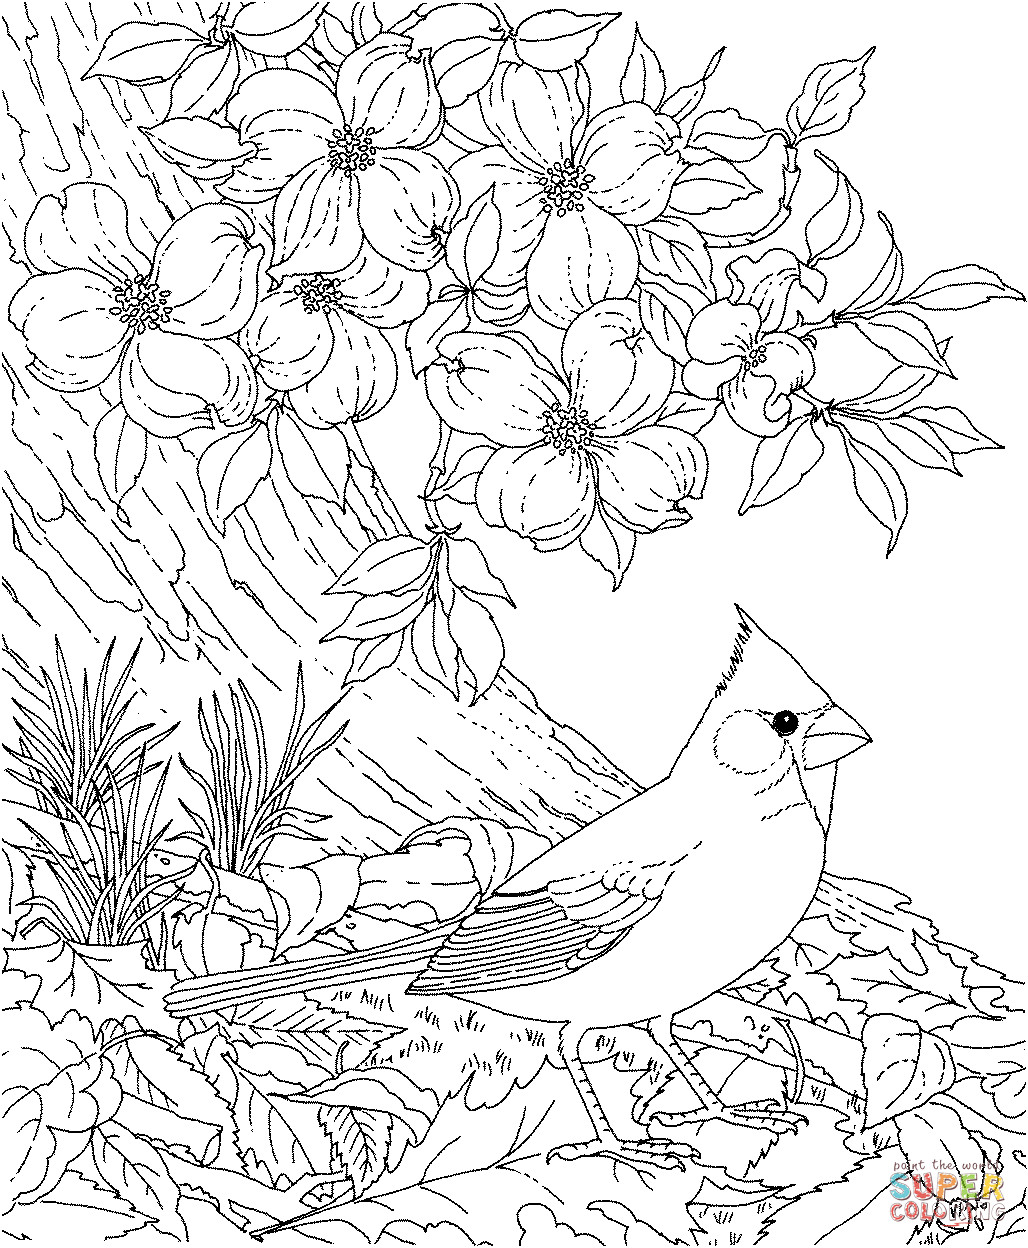 Bird Coloring Book For Adults
 Red Cardinal and Dogwood Blossom North Carolina Bird and